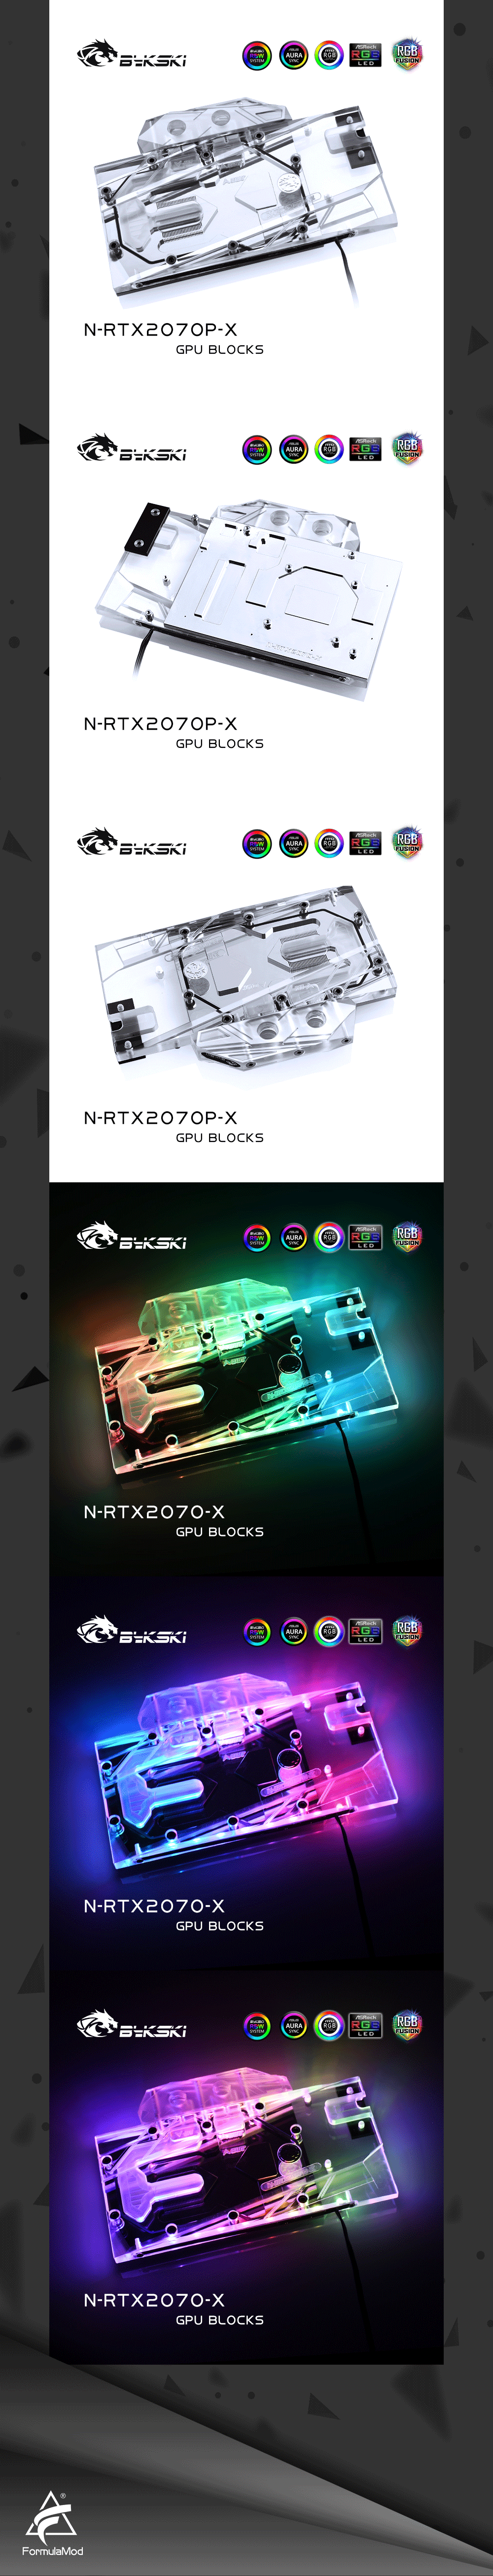 Bykski N-RTX2070-X Full Cover Graphics Card Water Cooling Block, Exclusive Backplane For Nvida Founder Edition RTX2070  